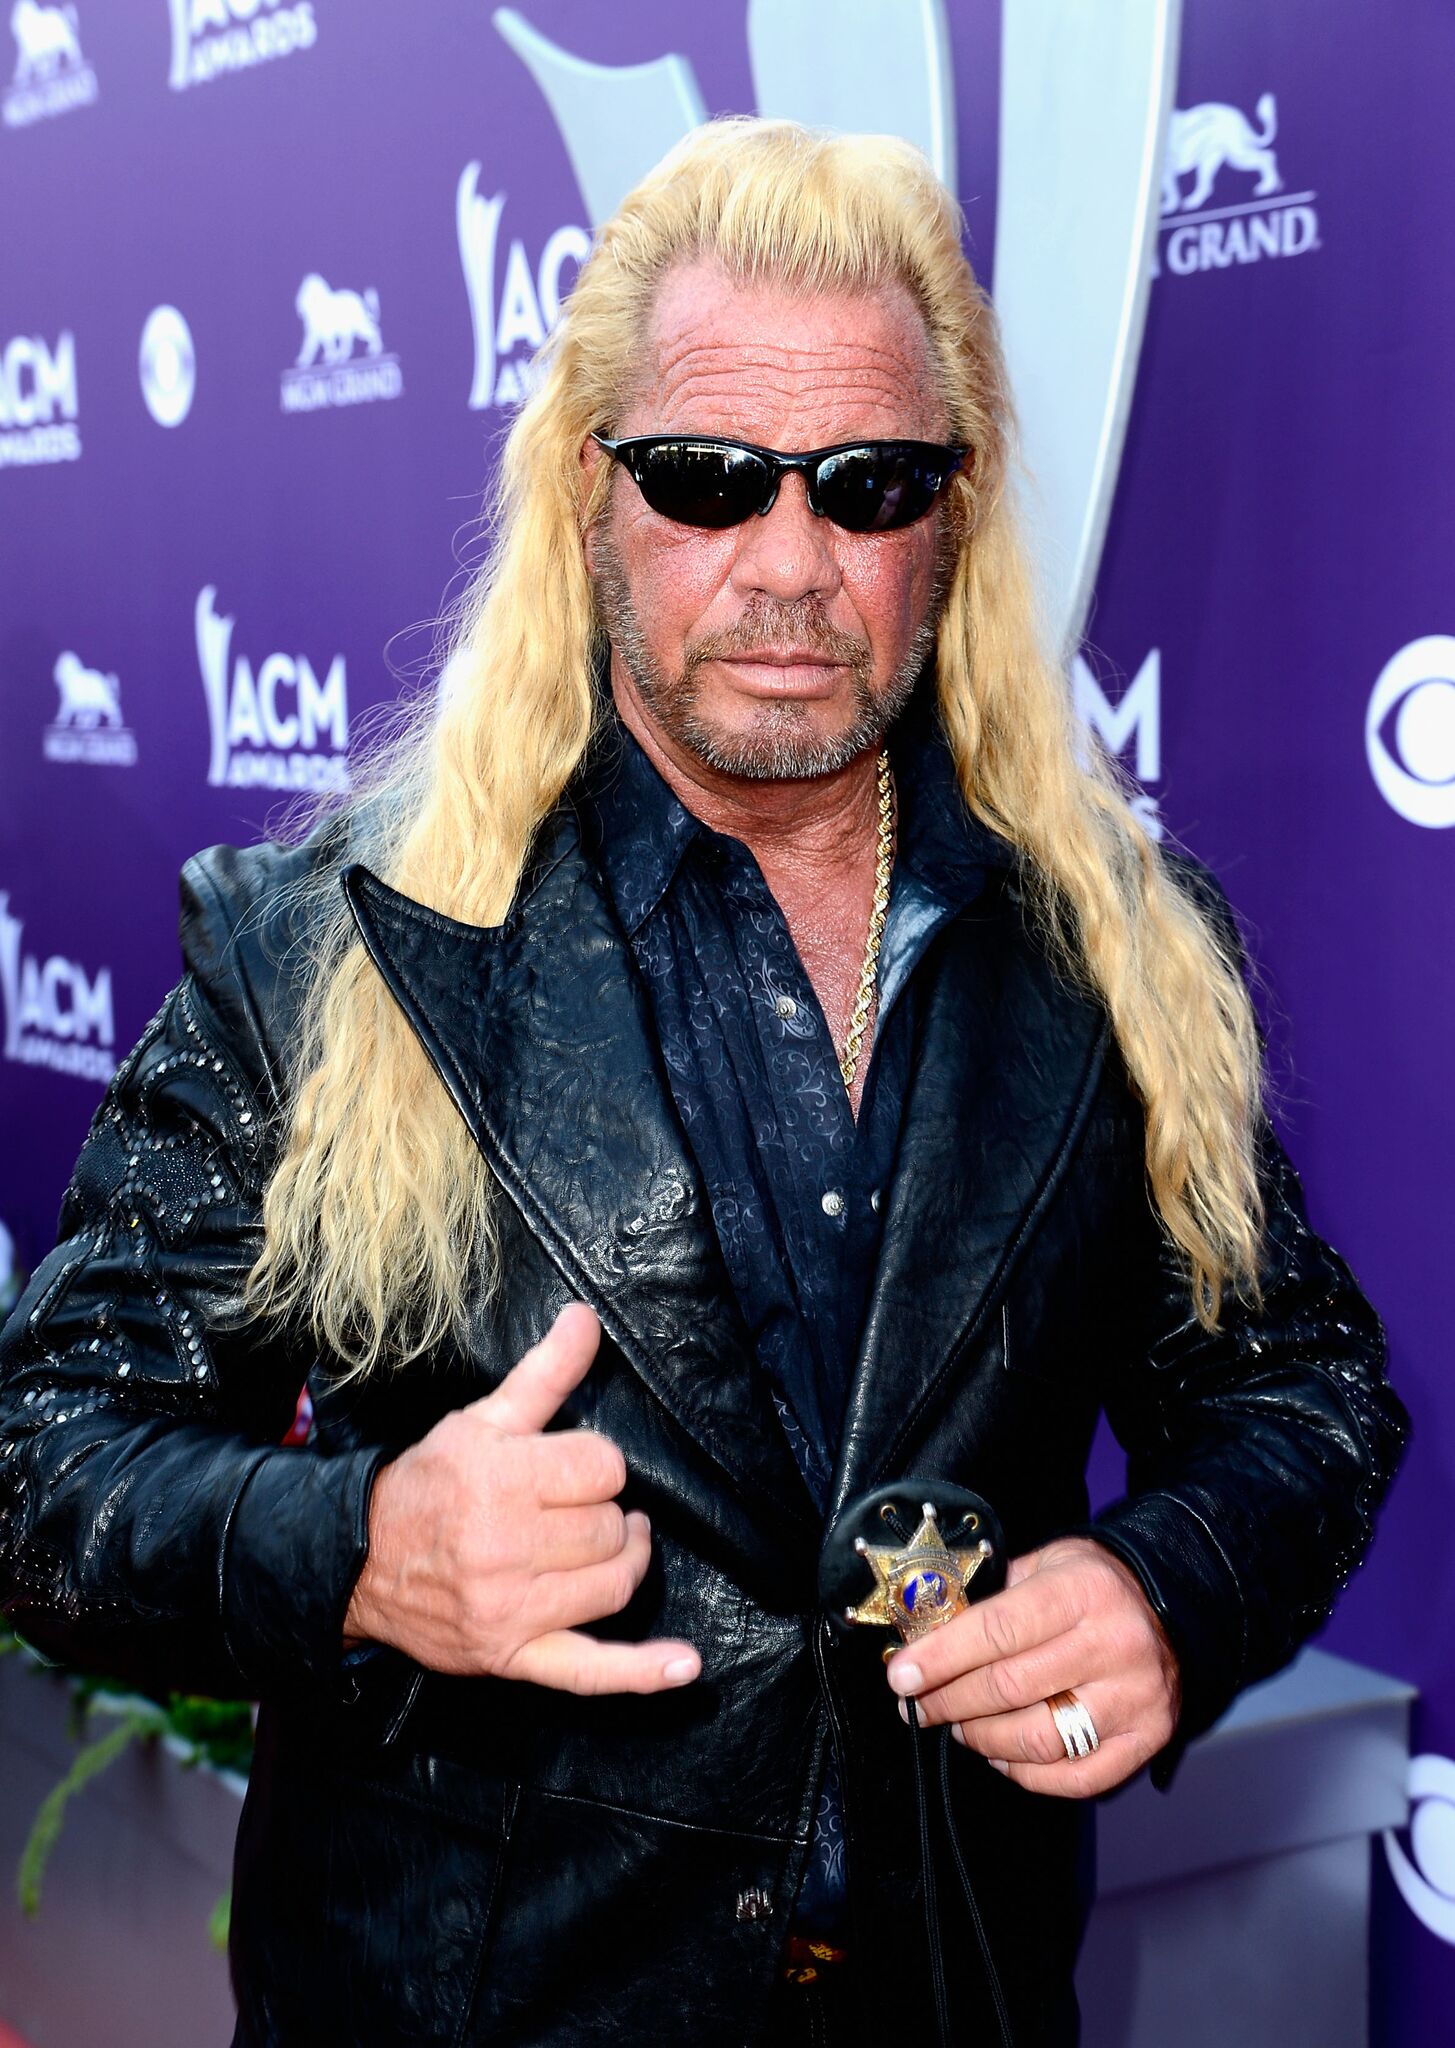 TV personality Dog the Bounty Hunter arrives at the 48th Annual Academy of Country Music Awards at the MGM Grand Garden Arena | Photo: Getty Images 